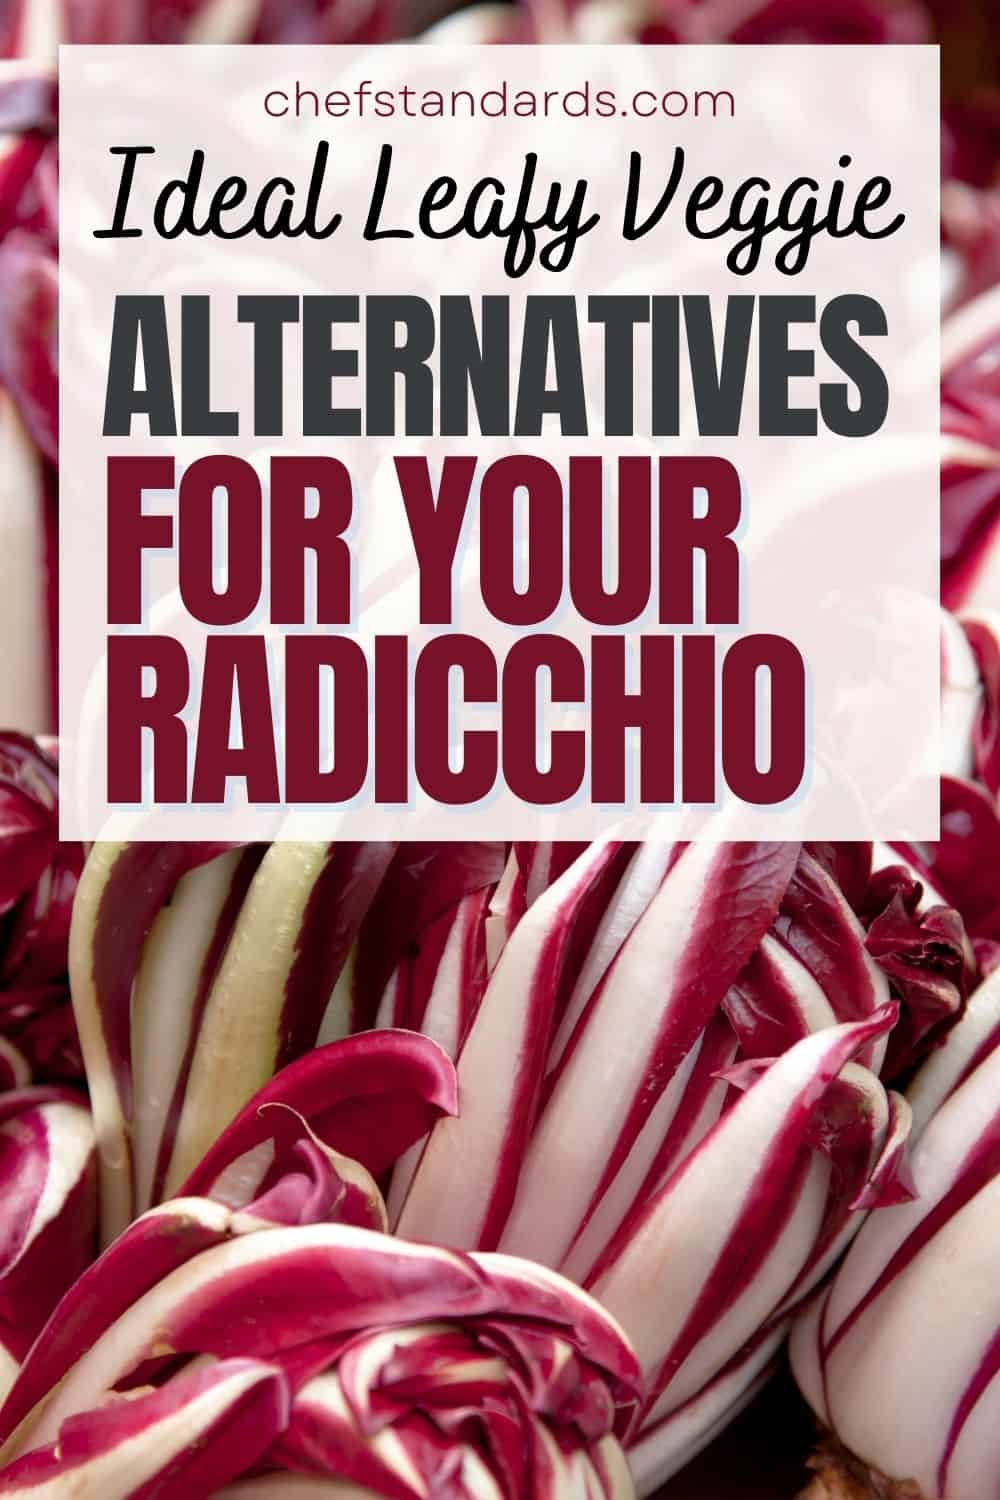 15 Radicchio Substitutes Both Nutritious And Flavorful 